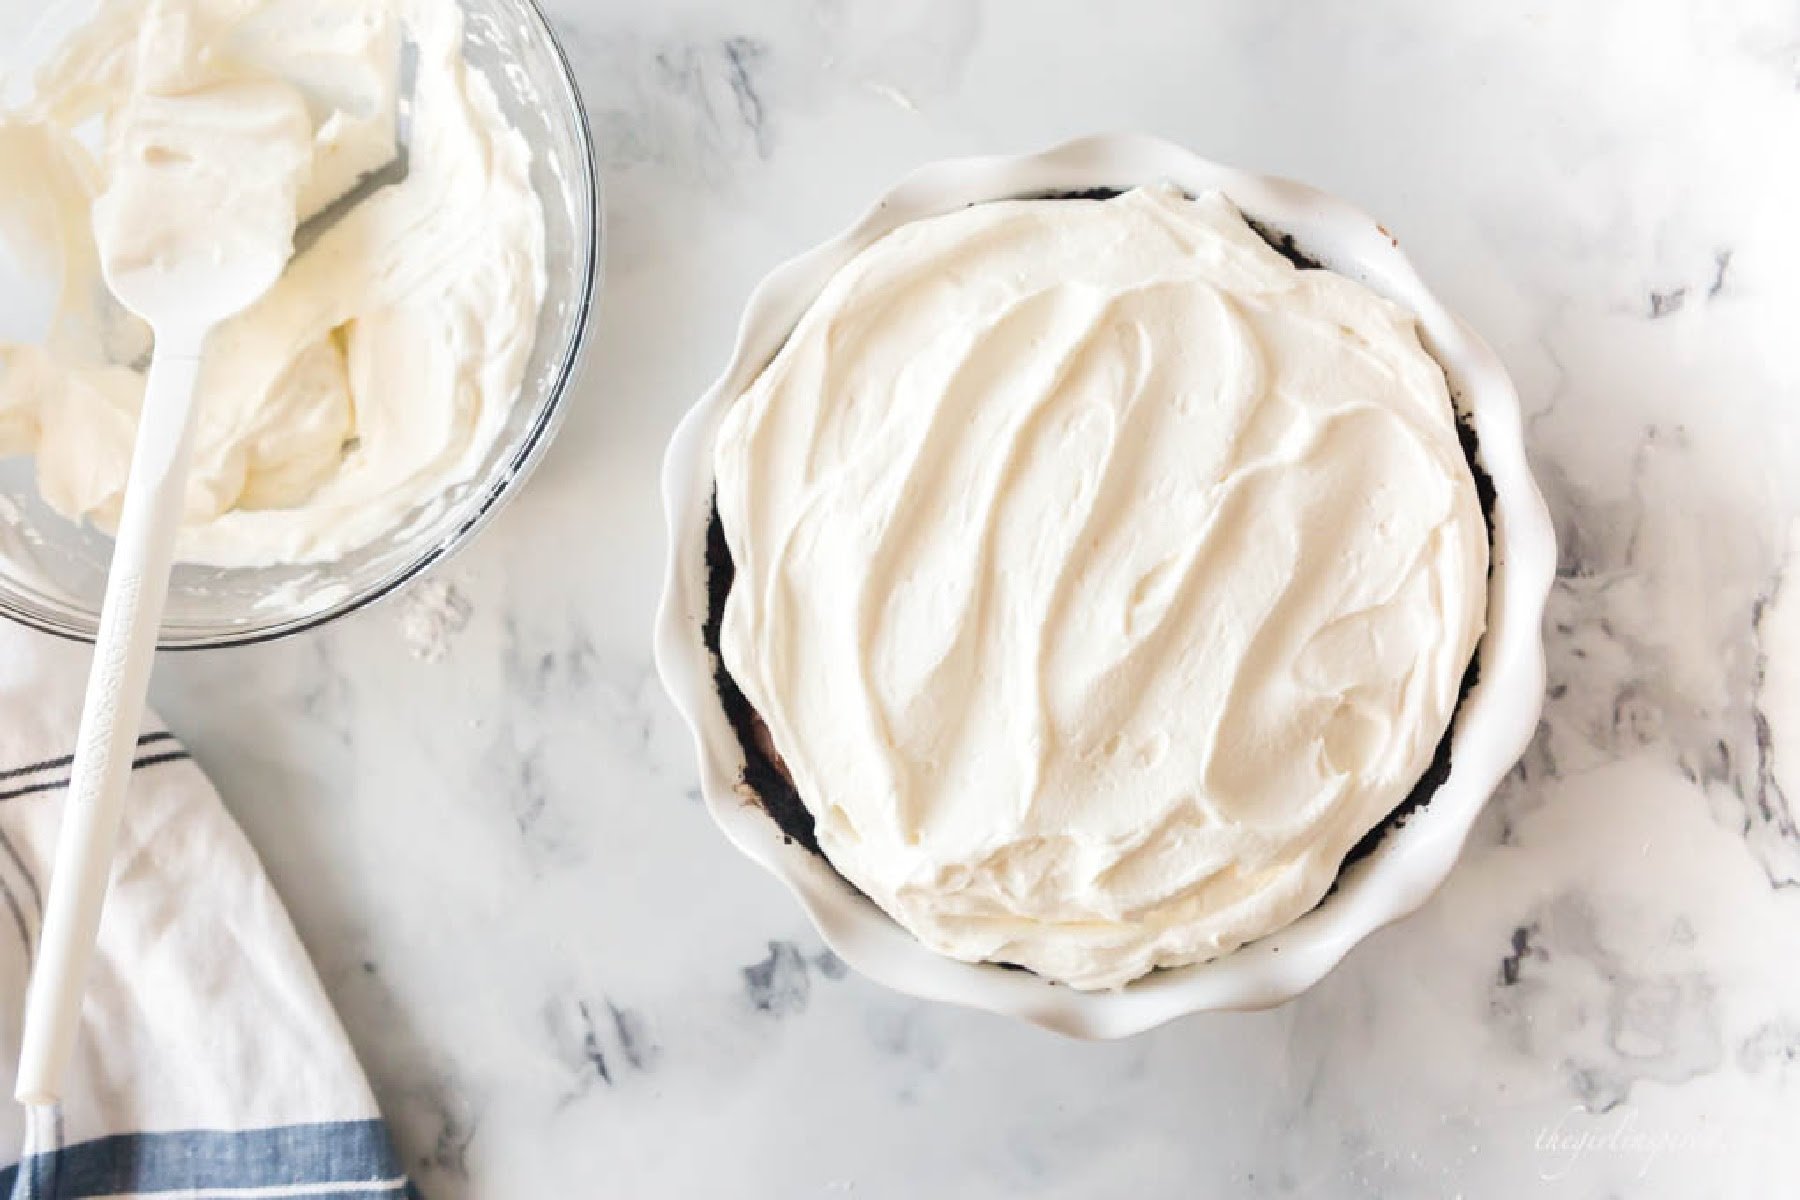 Topping the chocolate cream pie with whipped cream.